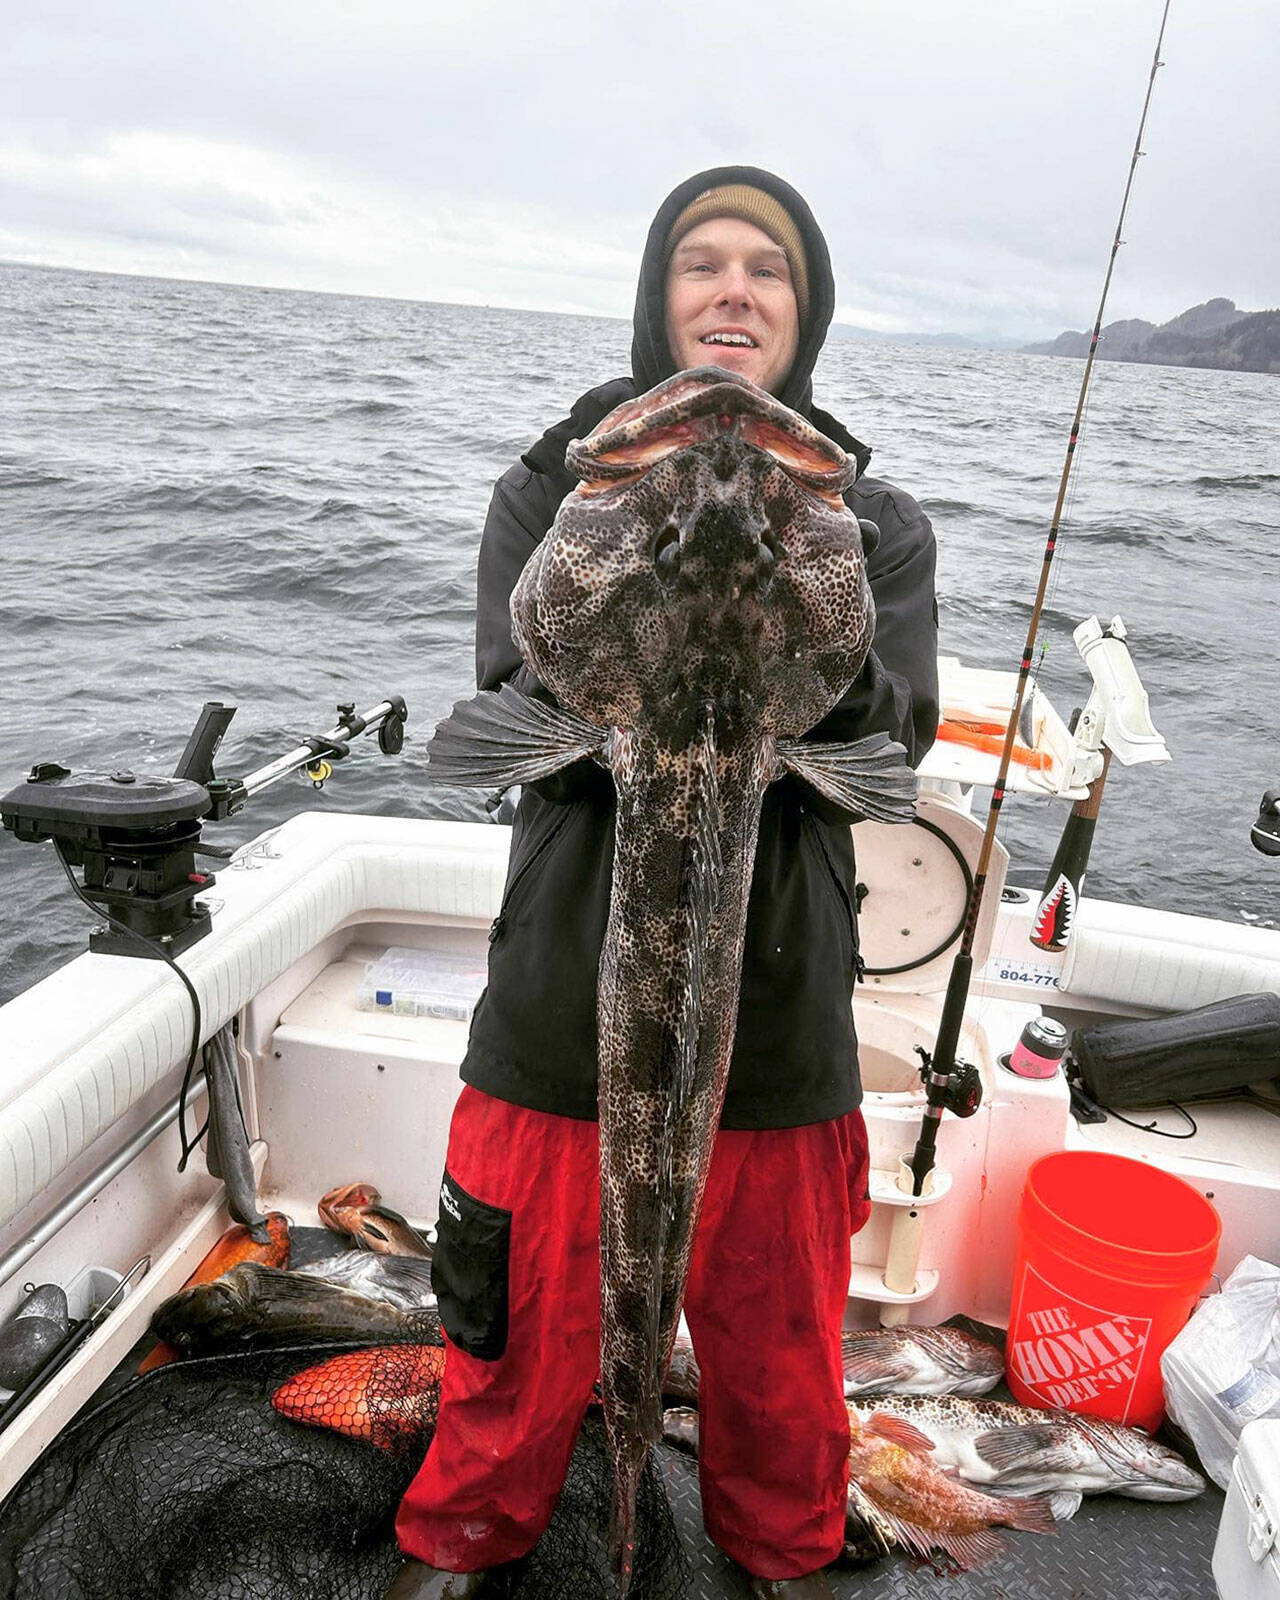 Angler Joseph Ebsworth landed this good-sized lingcod while fishing out of Neah Bay on the lingcod and bottomfish opener last Saturday.